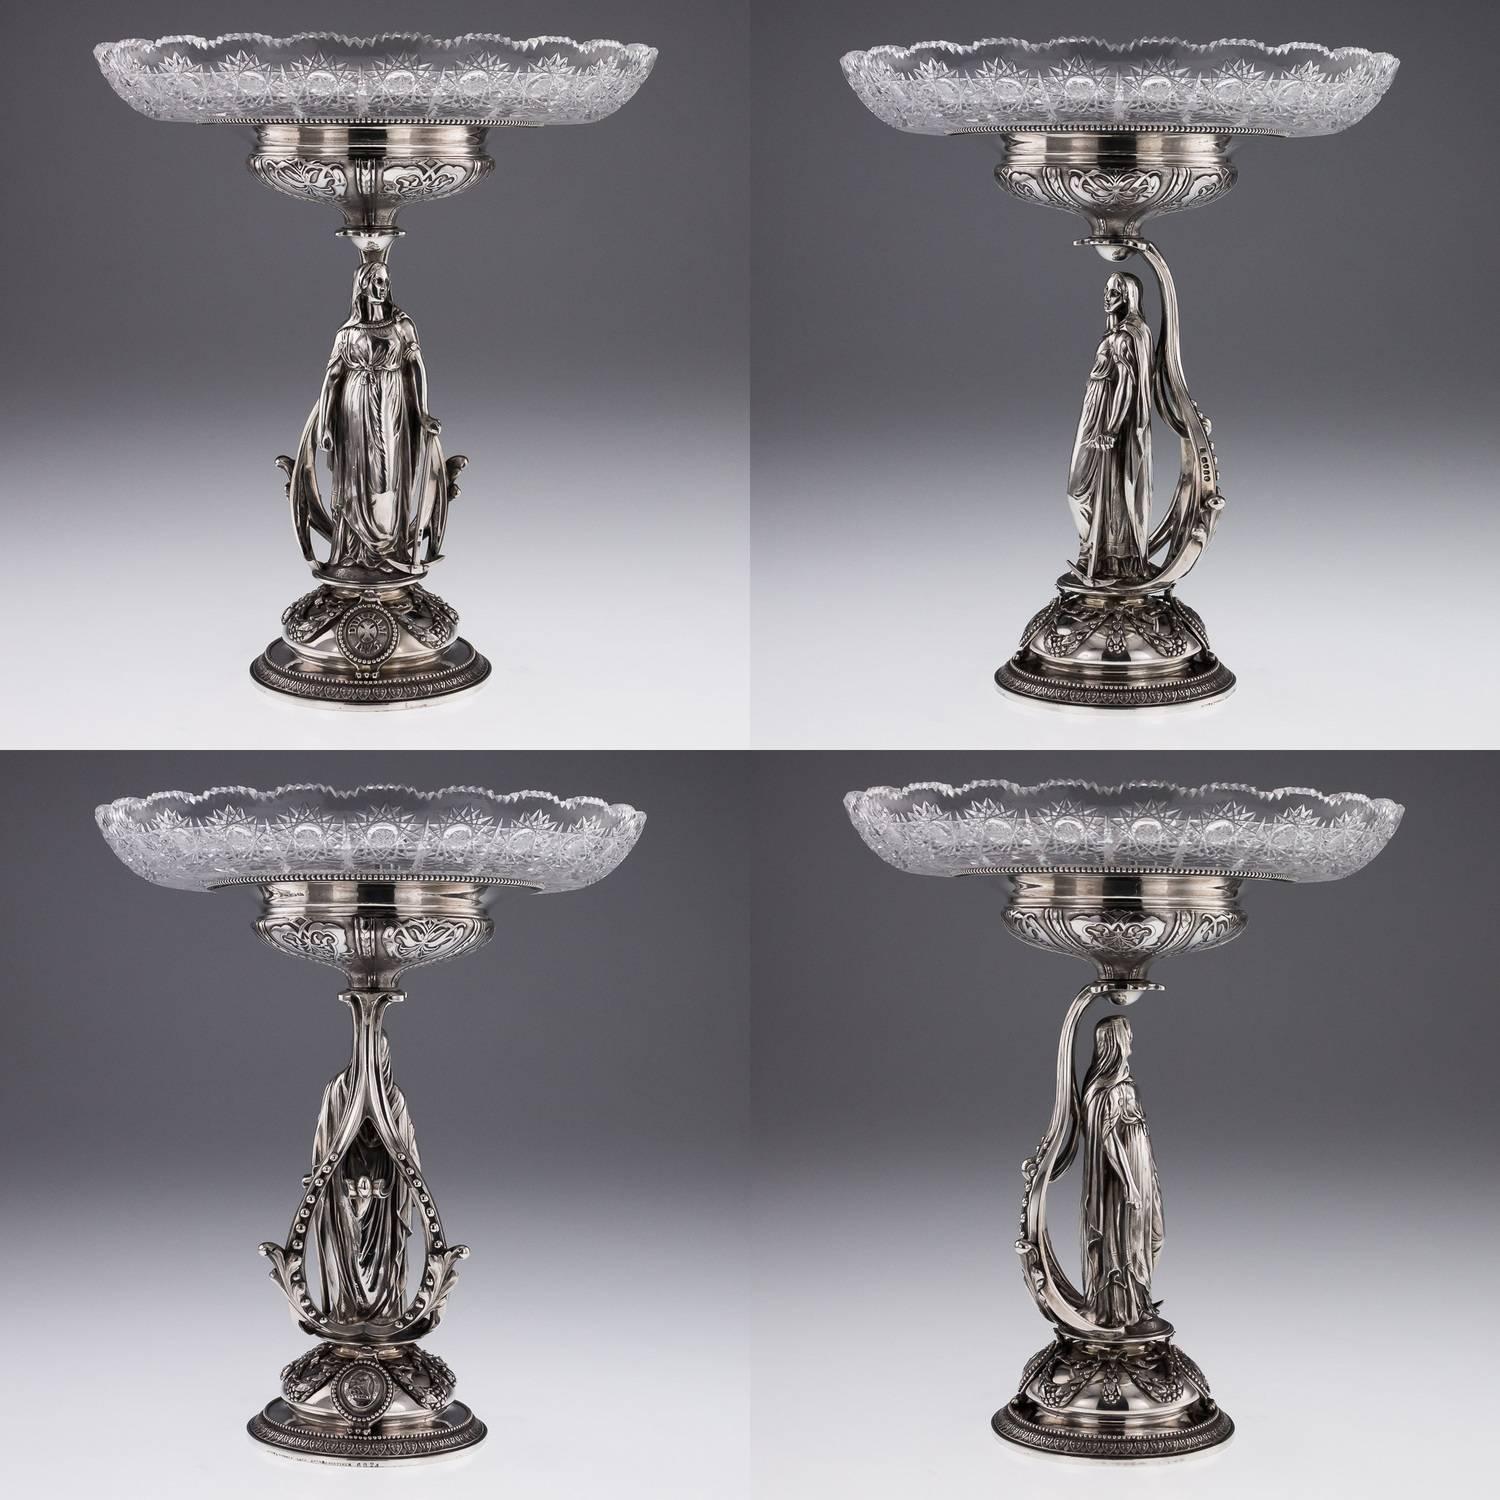 Description
Antique 19th century magnificent and unique pair of Victorian solid silver figural comports, each piece raised on a circular domed base chased and applied with swags and cast armorials, each stunning figural stems modelled like a large